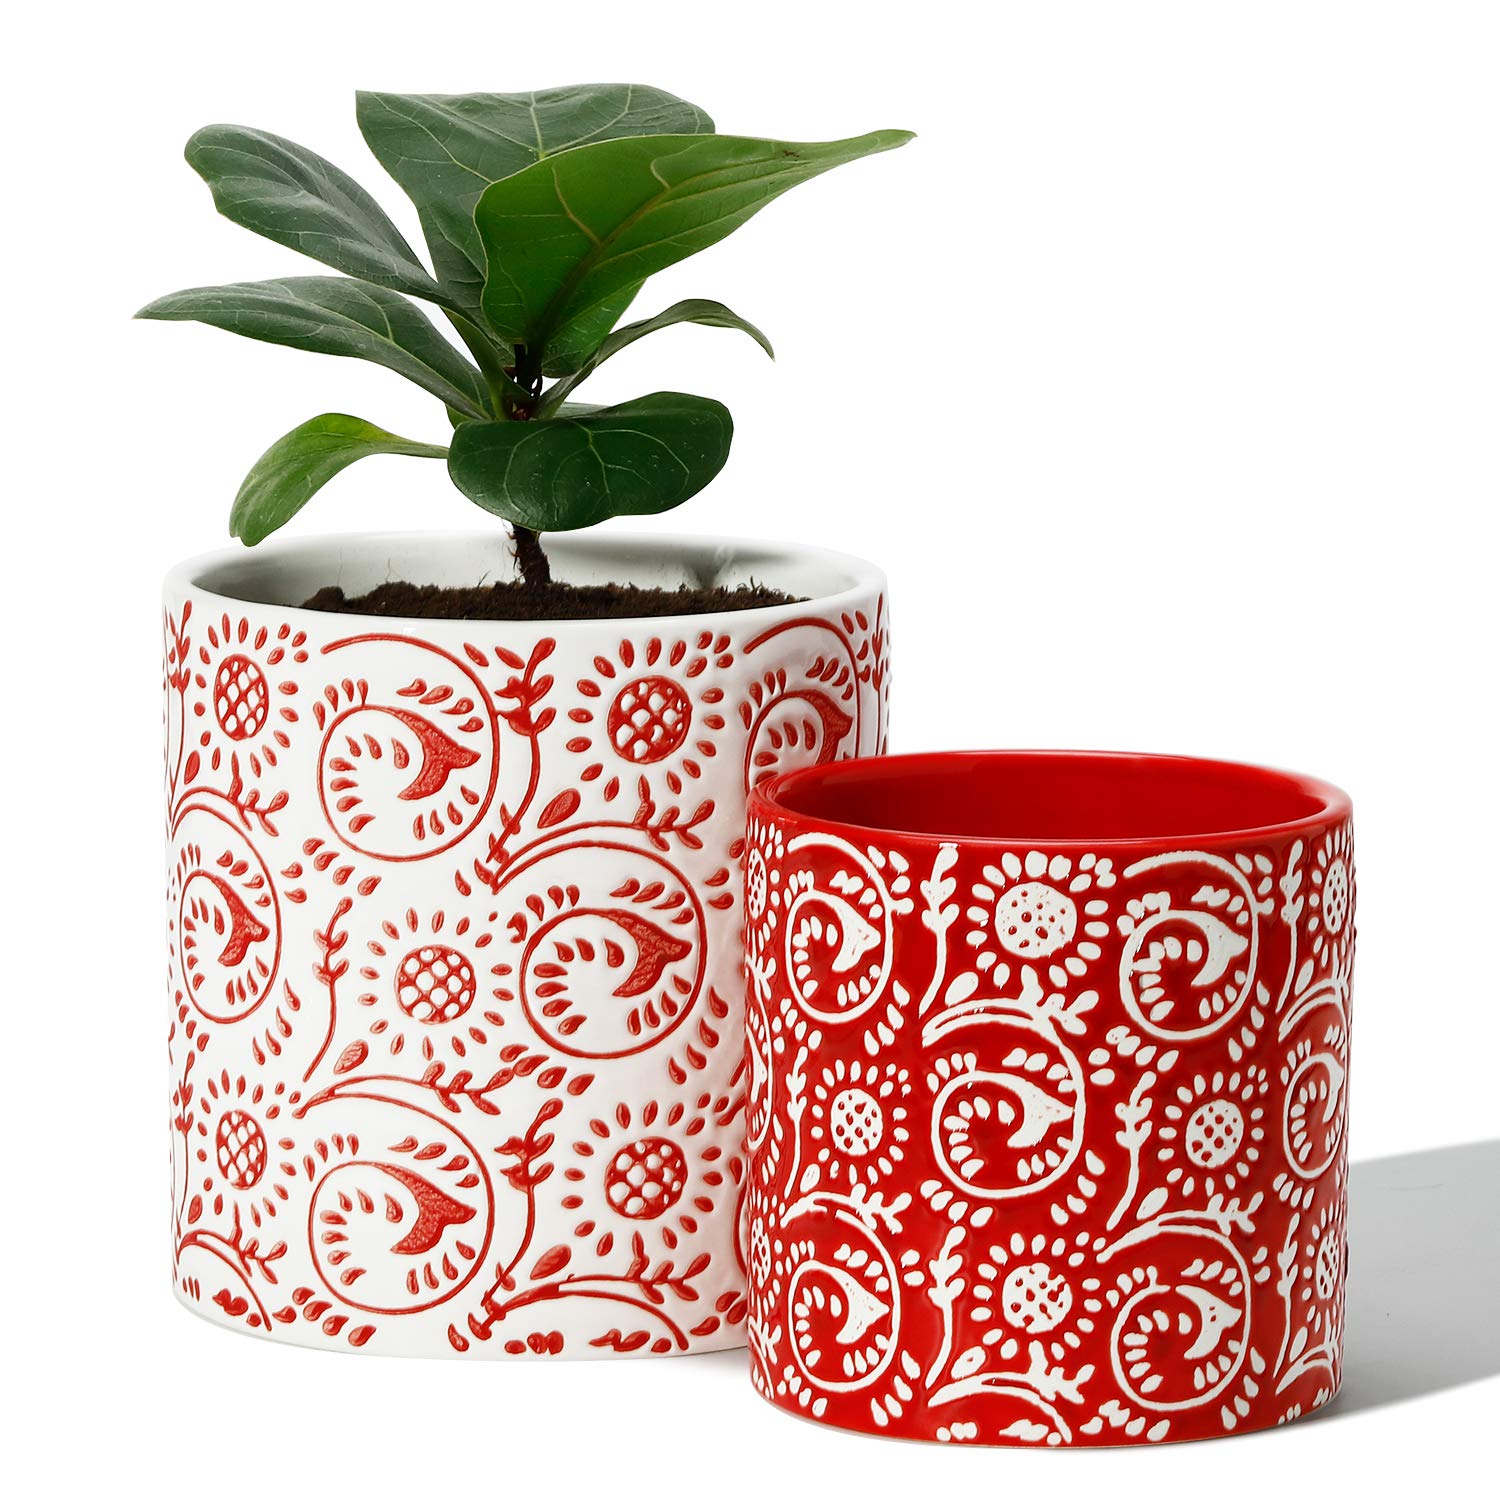 Book Cover POTEY Red Planters Pots for Plants Indoor - 5.9 +4.7 Inch Modern Ceramic Cylinder Flower Pots with Drainage Holes for Christmas Home Decor 051801, Set of 2, Plants Not Included